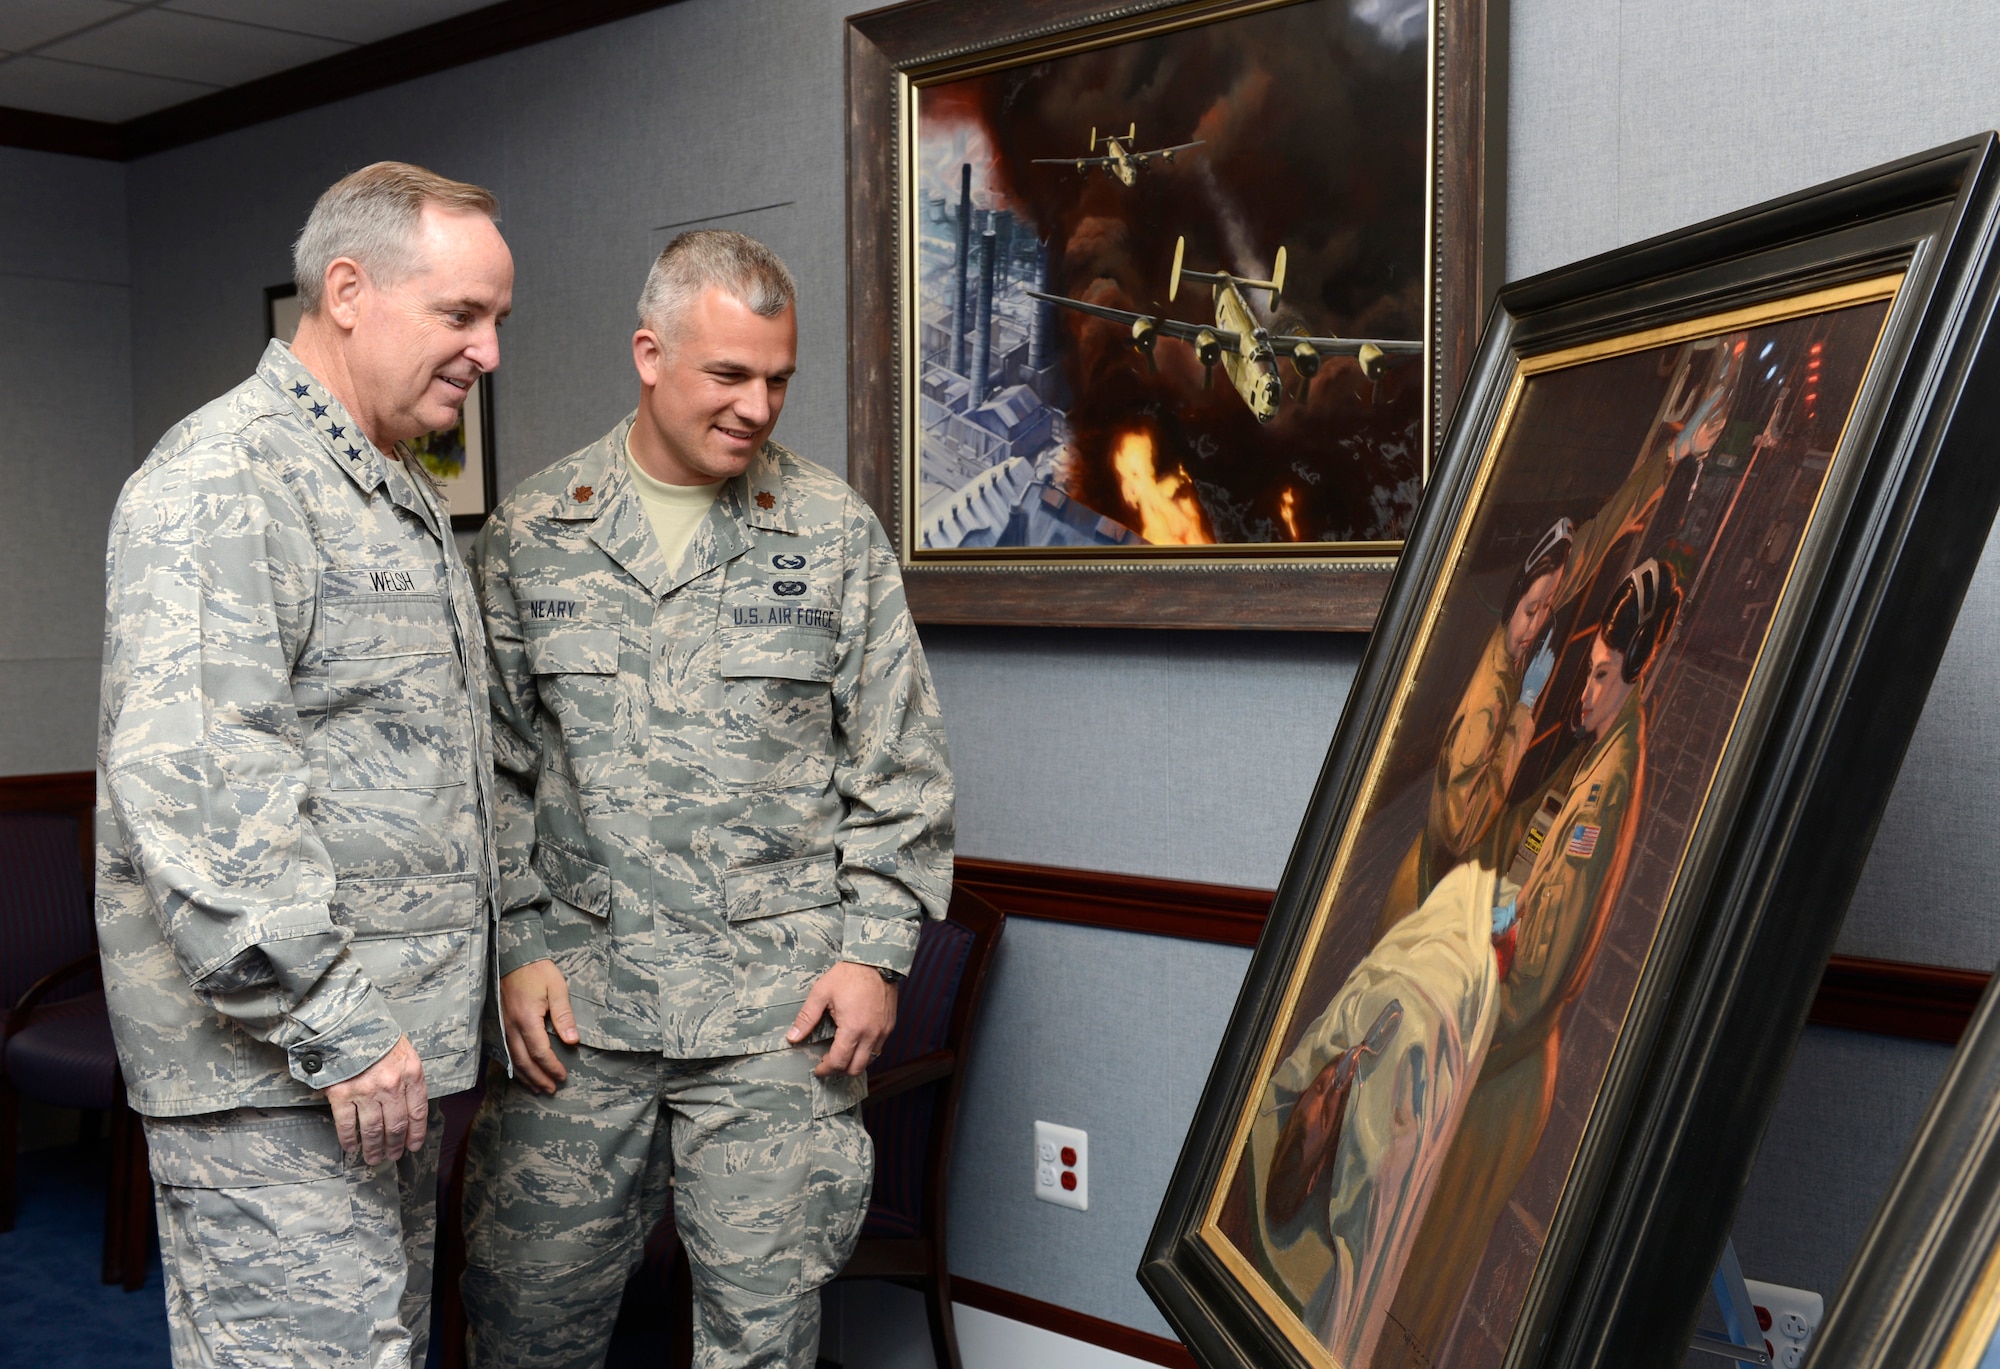 Air Force Chief of Staff Gen. Mark A. Welsh III looks at the painting, "Bandage 33," June 20, 2014, with the artist, Maj. Warren Neary, in the Pentagon. Neary, a U.S. Air Force Reserve historian, contributed "Bandage 33" and another work, titled "Showtime," through the Air Force Art Program. (U.S. Air Force photo/Scott M. Ash)